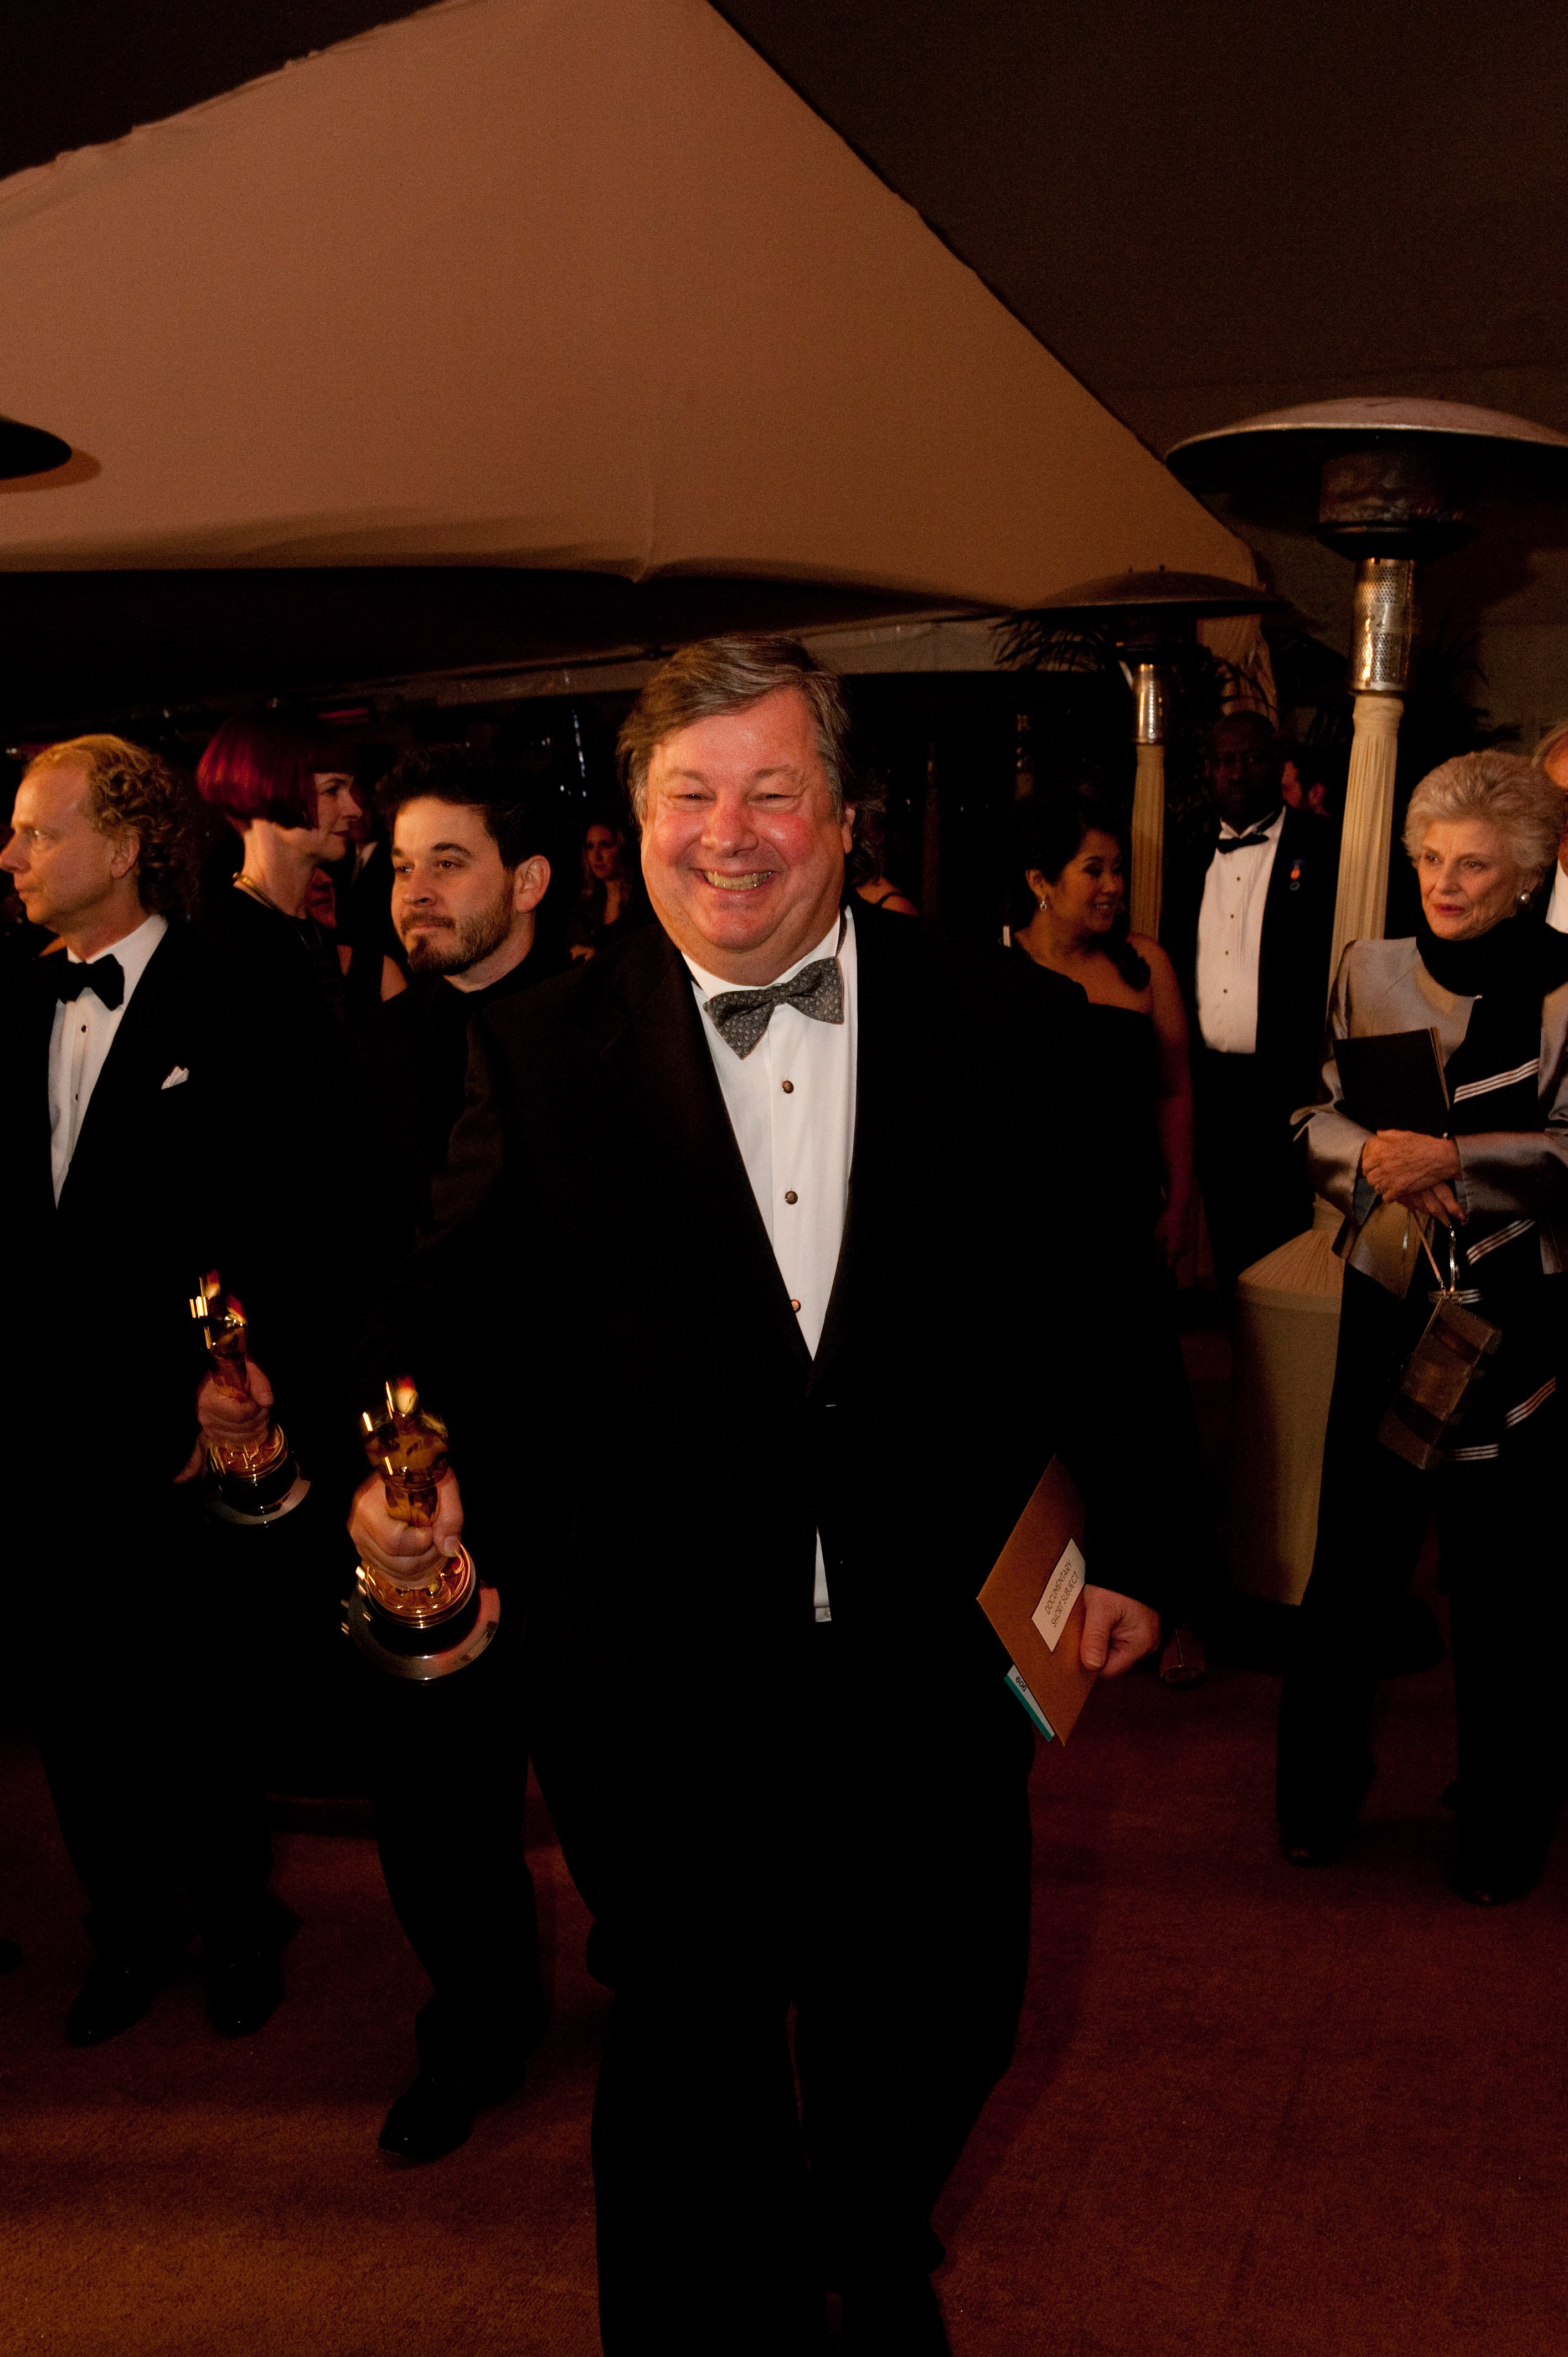 Arriving at the Governor's Ball after the Oscars 2011